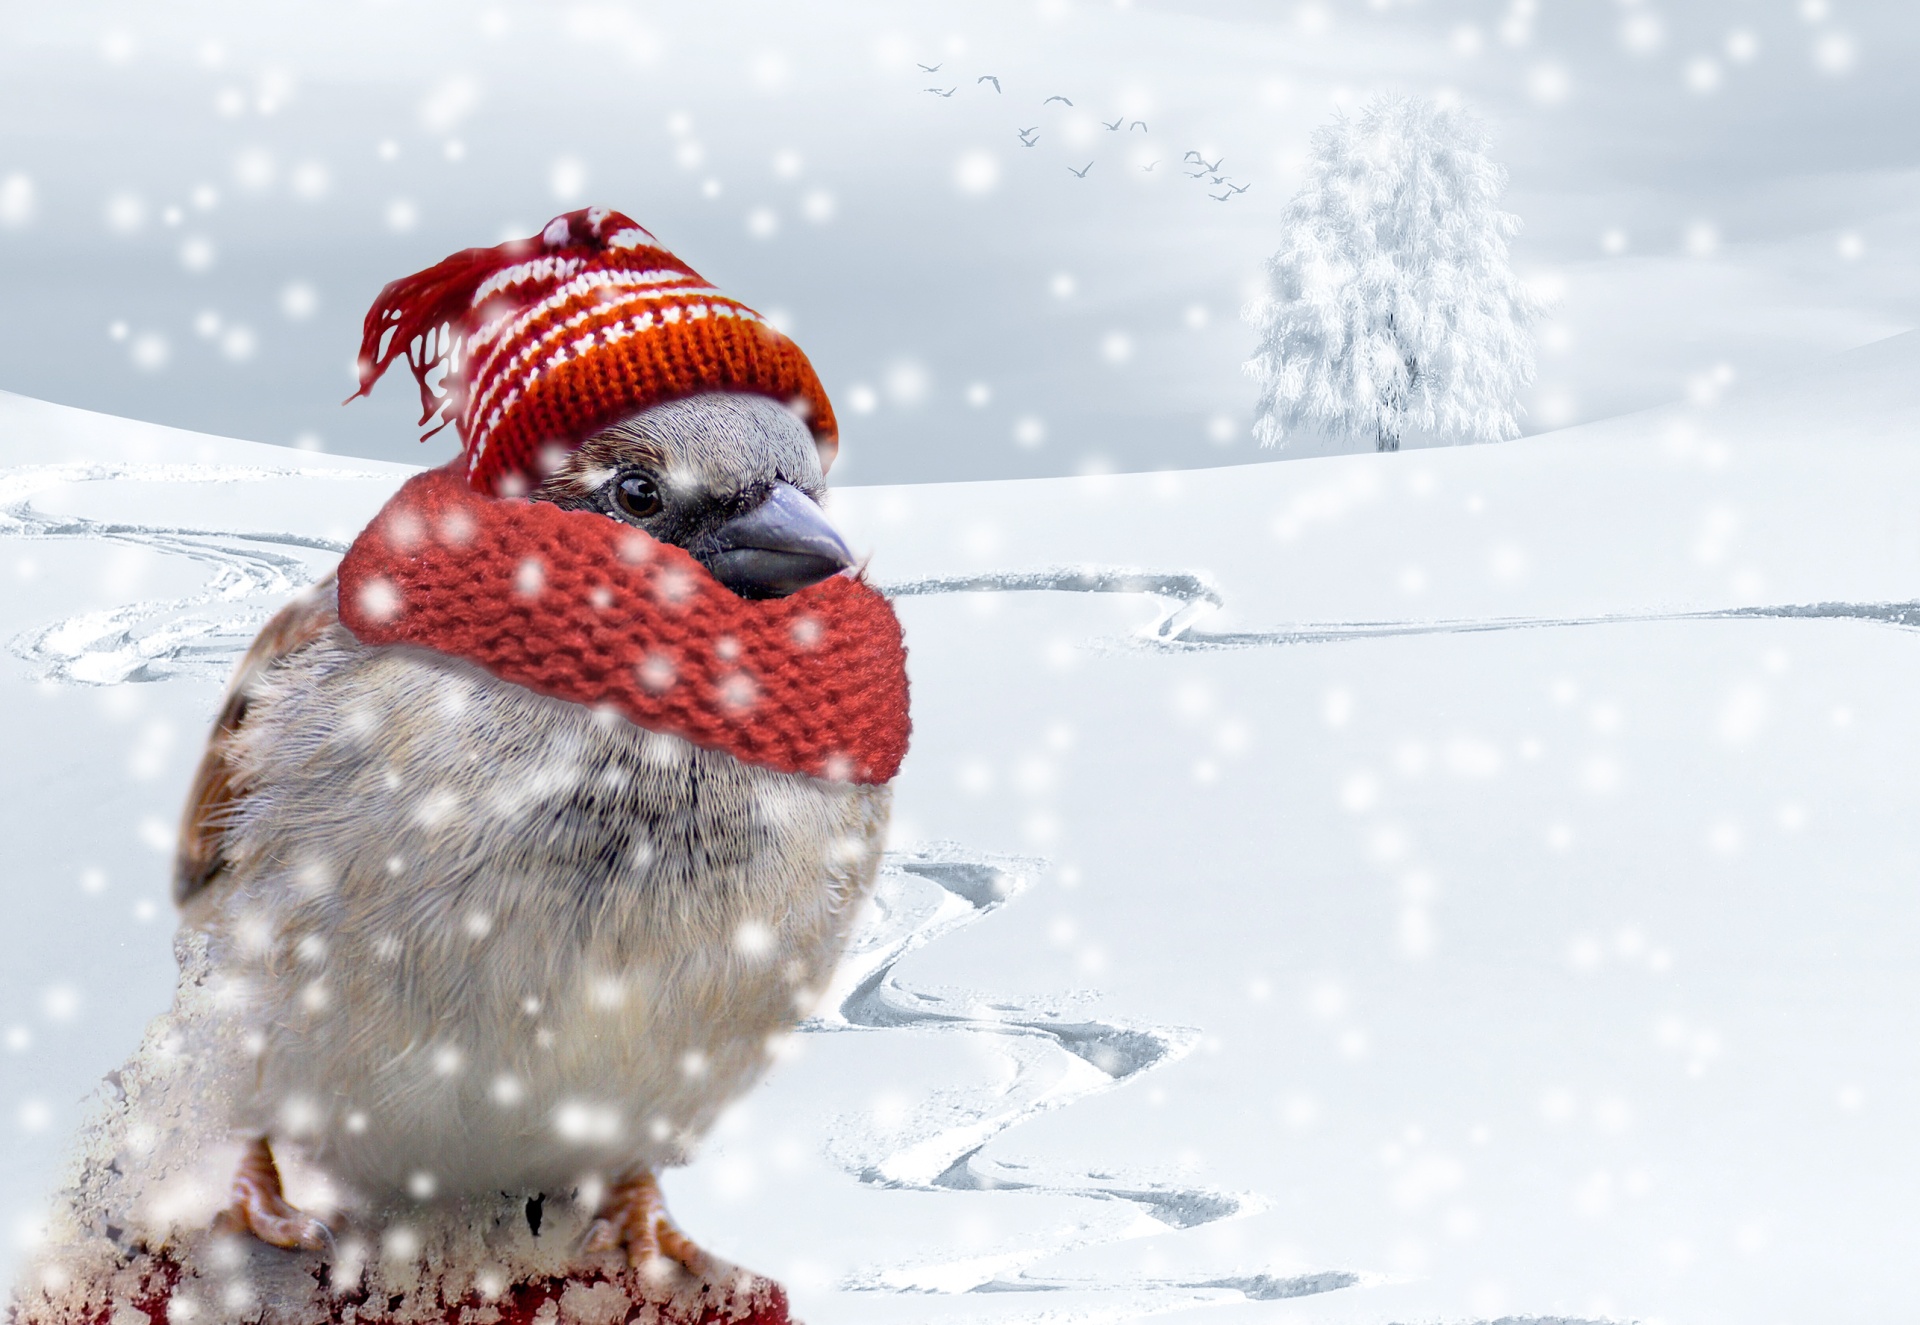 Cold little sparrow bird with hat and scarf